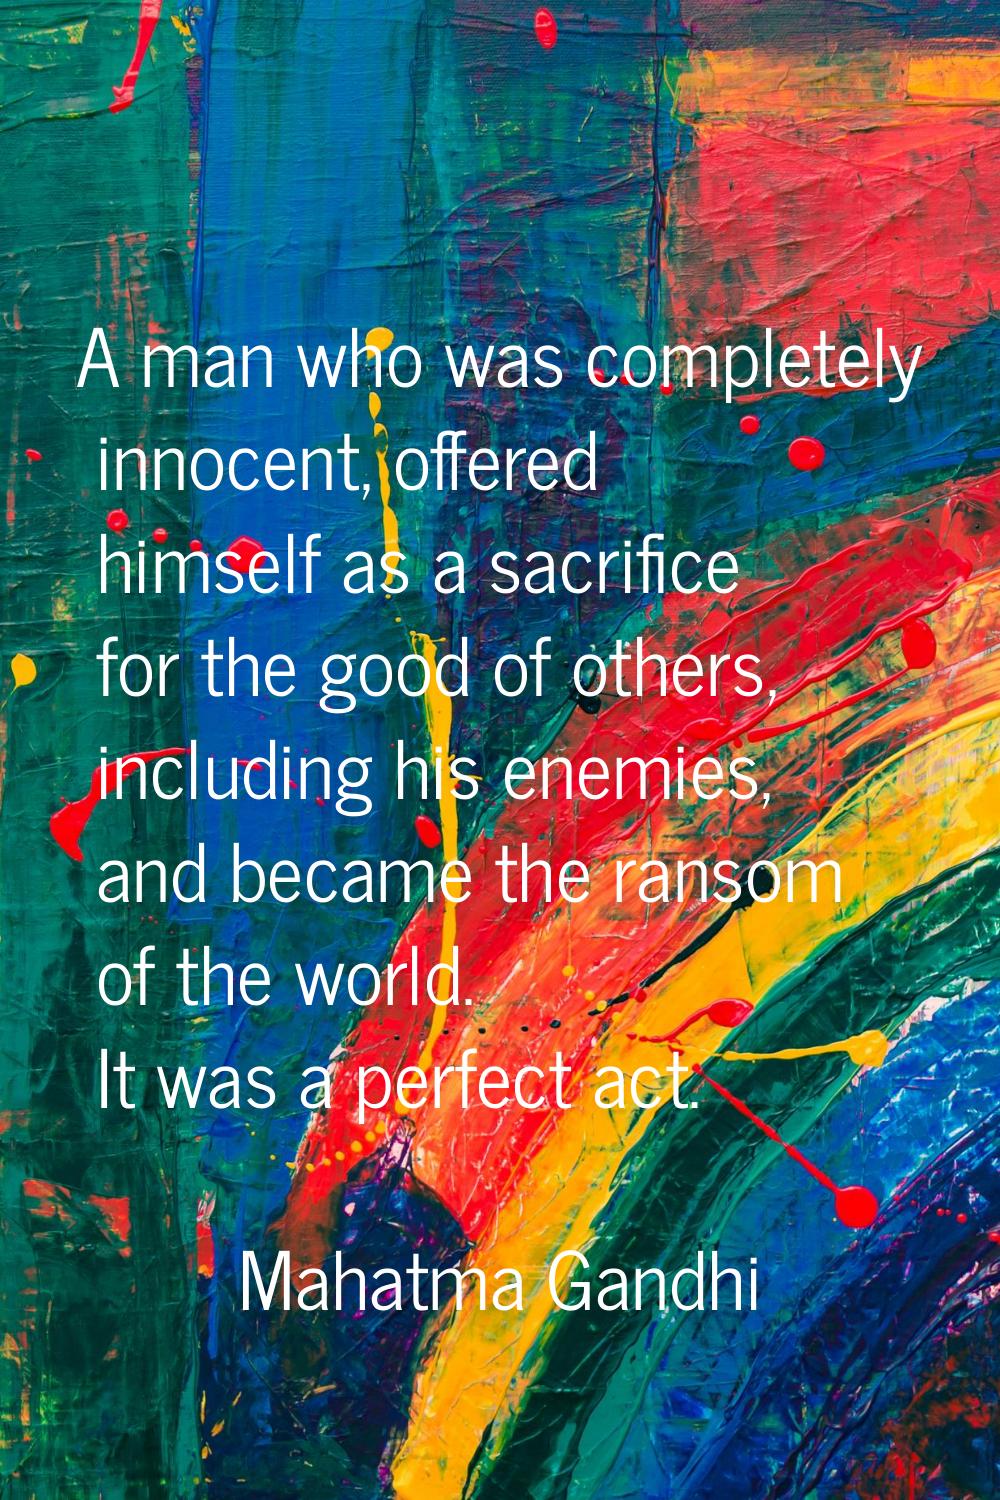 A man who was completely innocent, offered himself as a sacrifice for the good of others, including